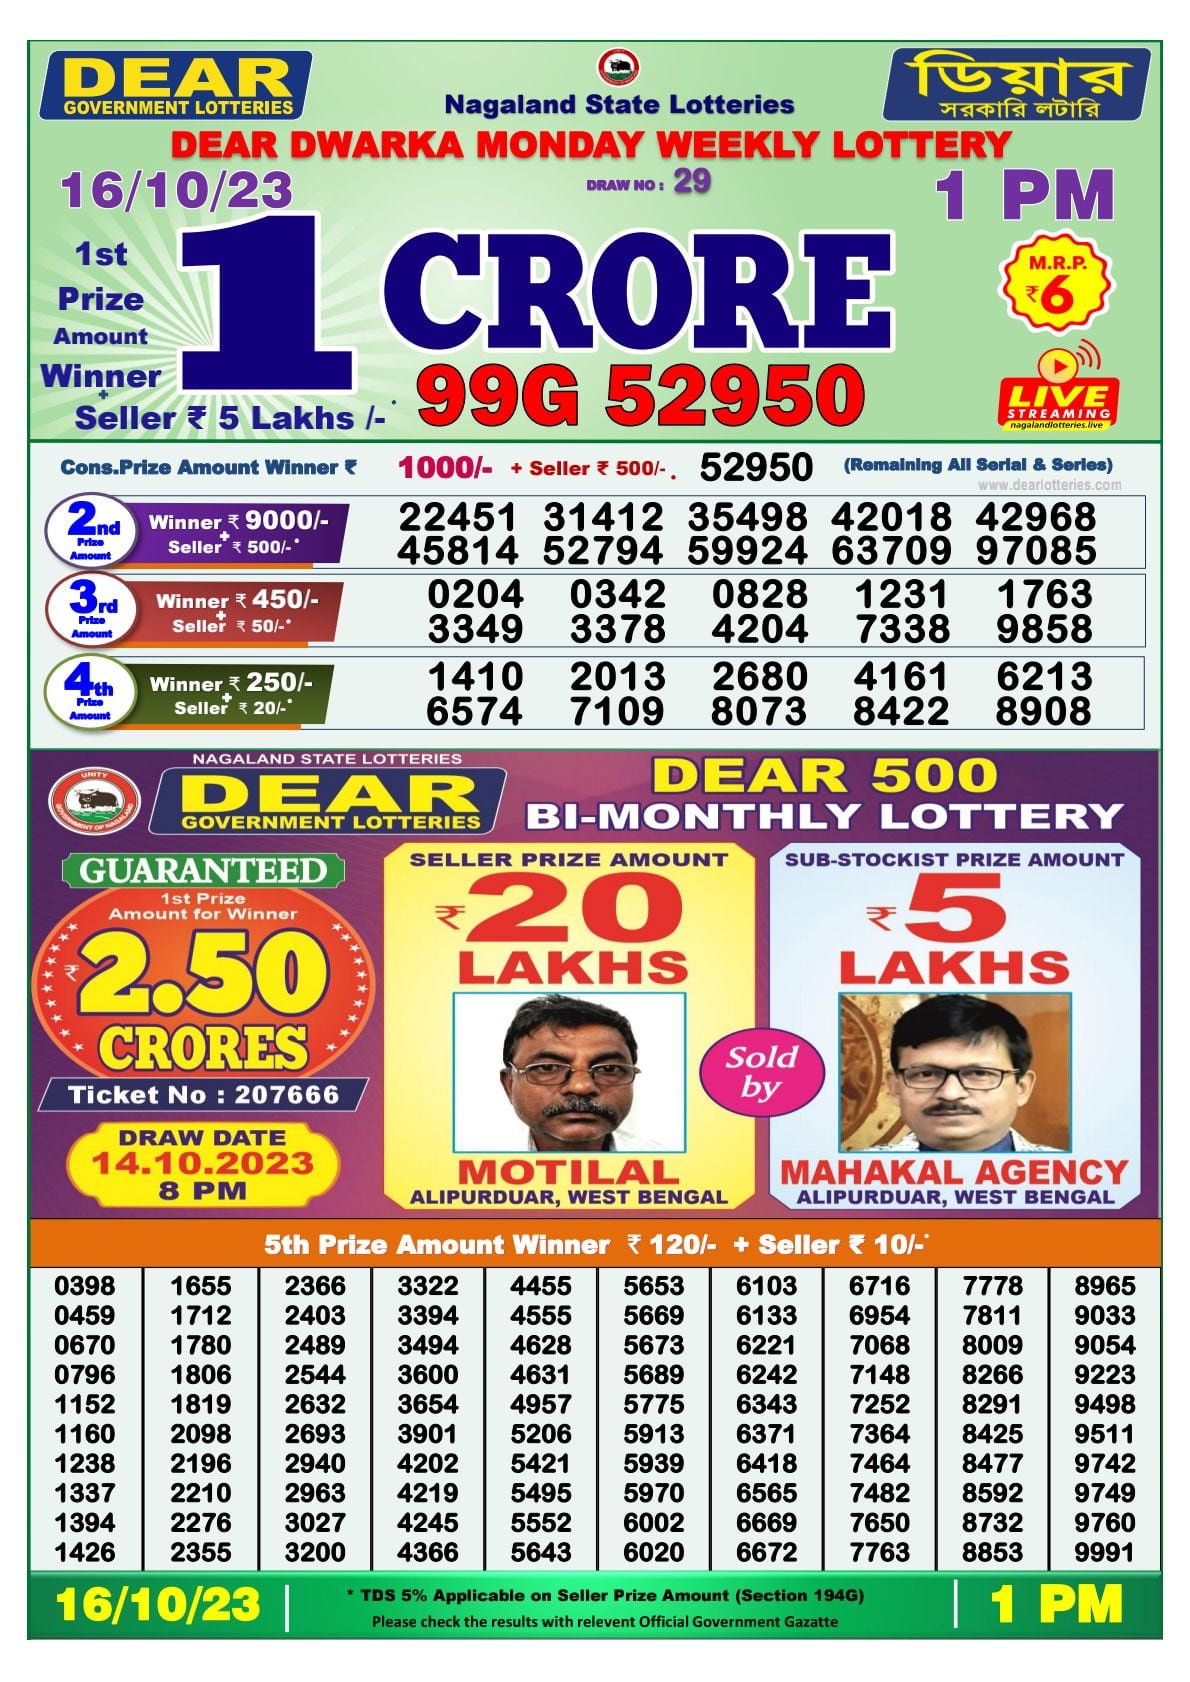 DEAR 6 PM ONWARDS DRAW DATE 24.04.2023 DEAR DESERT MONDAY WEEKLY LIVE DRAW  FROM KOHIMA - YouTube